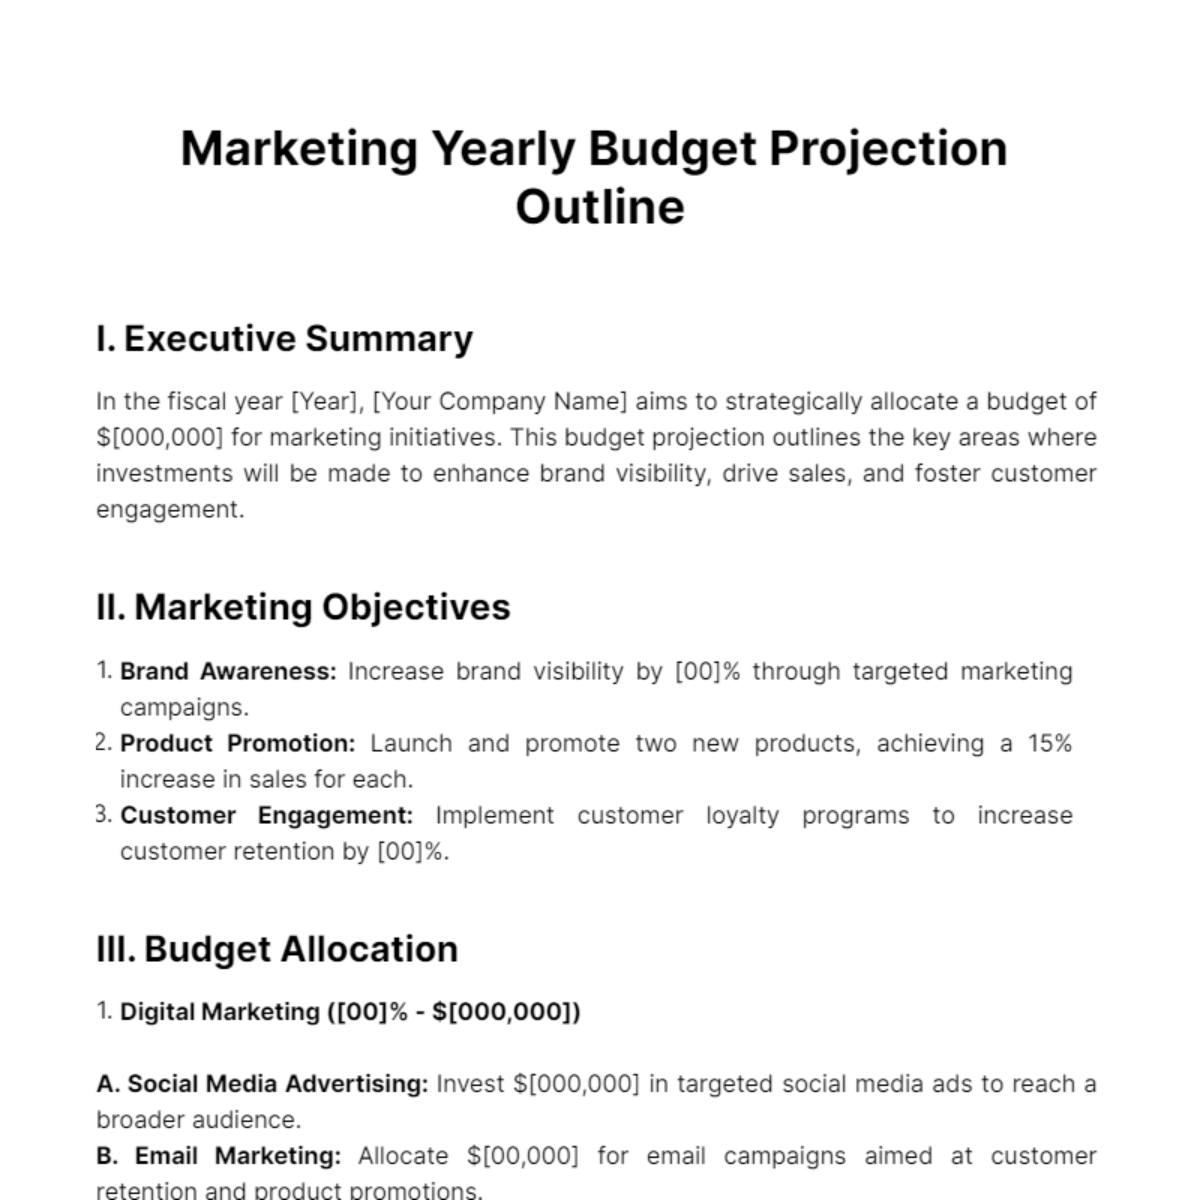 Free Marketing Yearly Budget Projection Outline Template